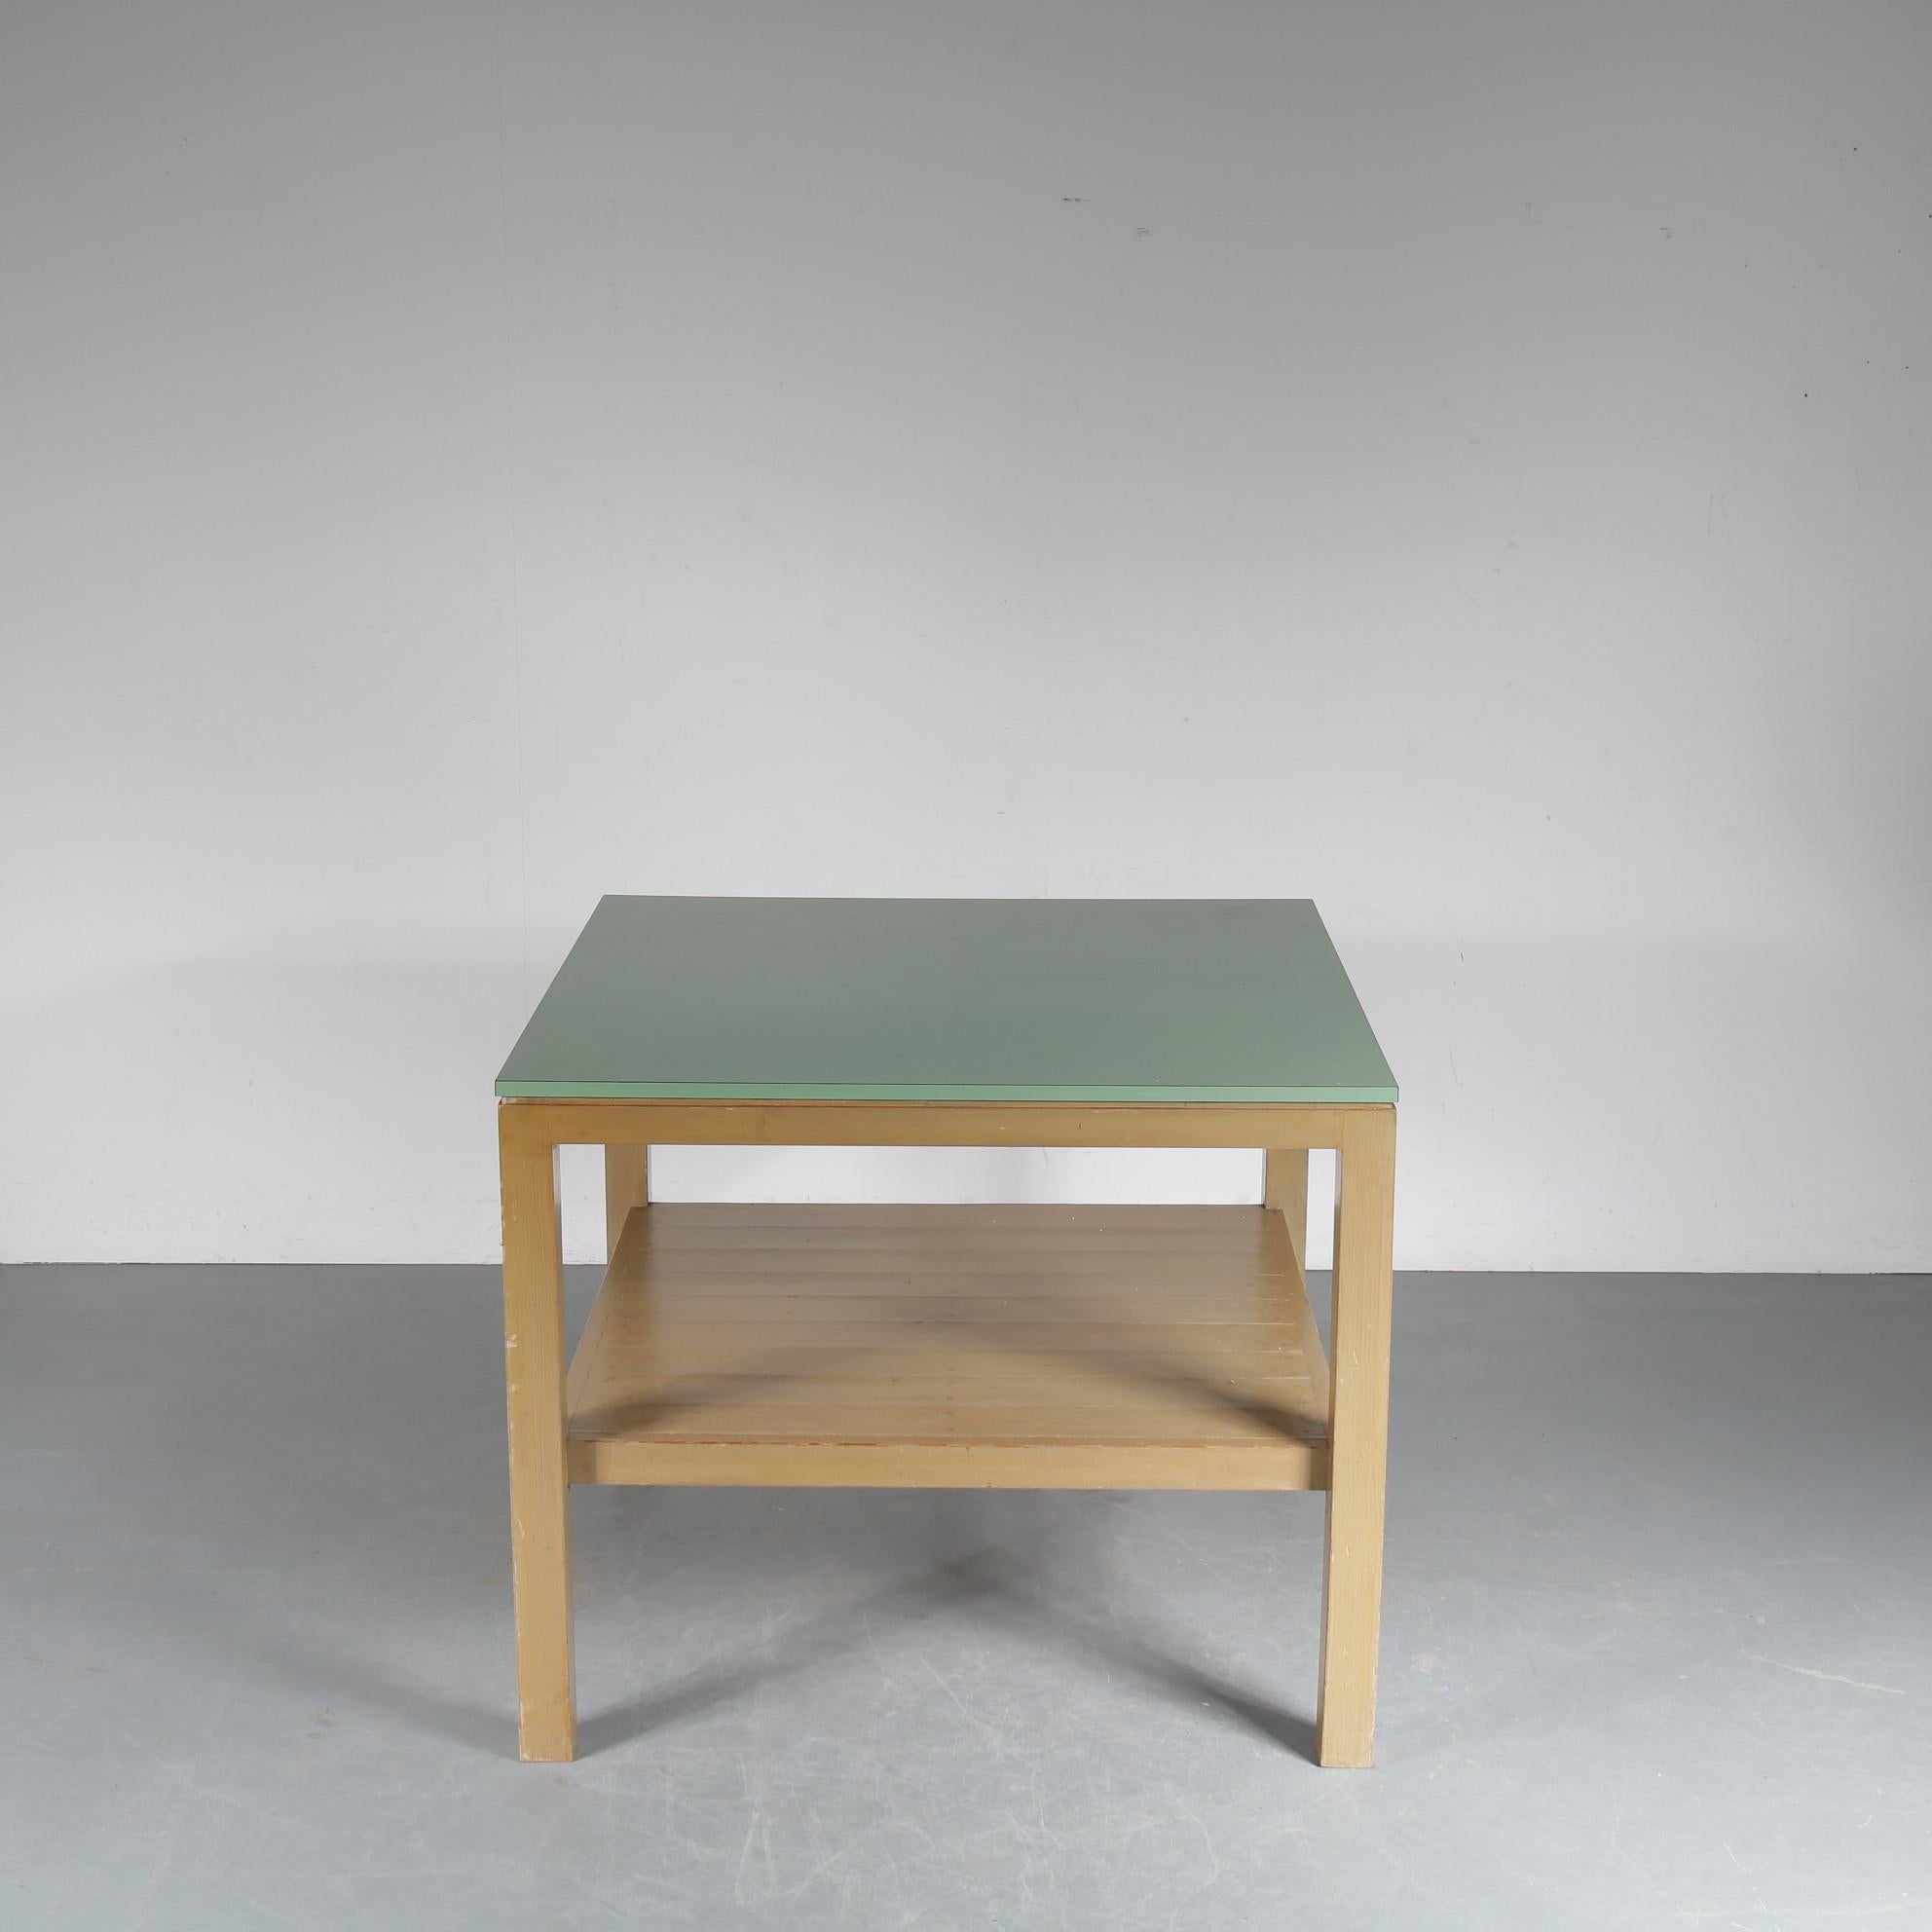 Late 20th Century Rare Dom Hans van der Laan Working Table, Netherlands, 1970 For Sale